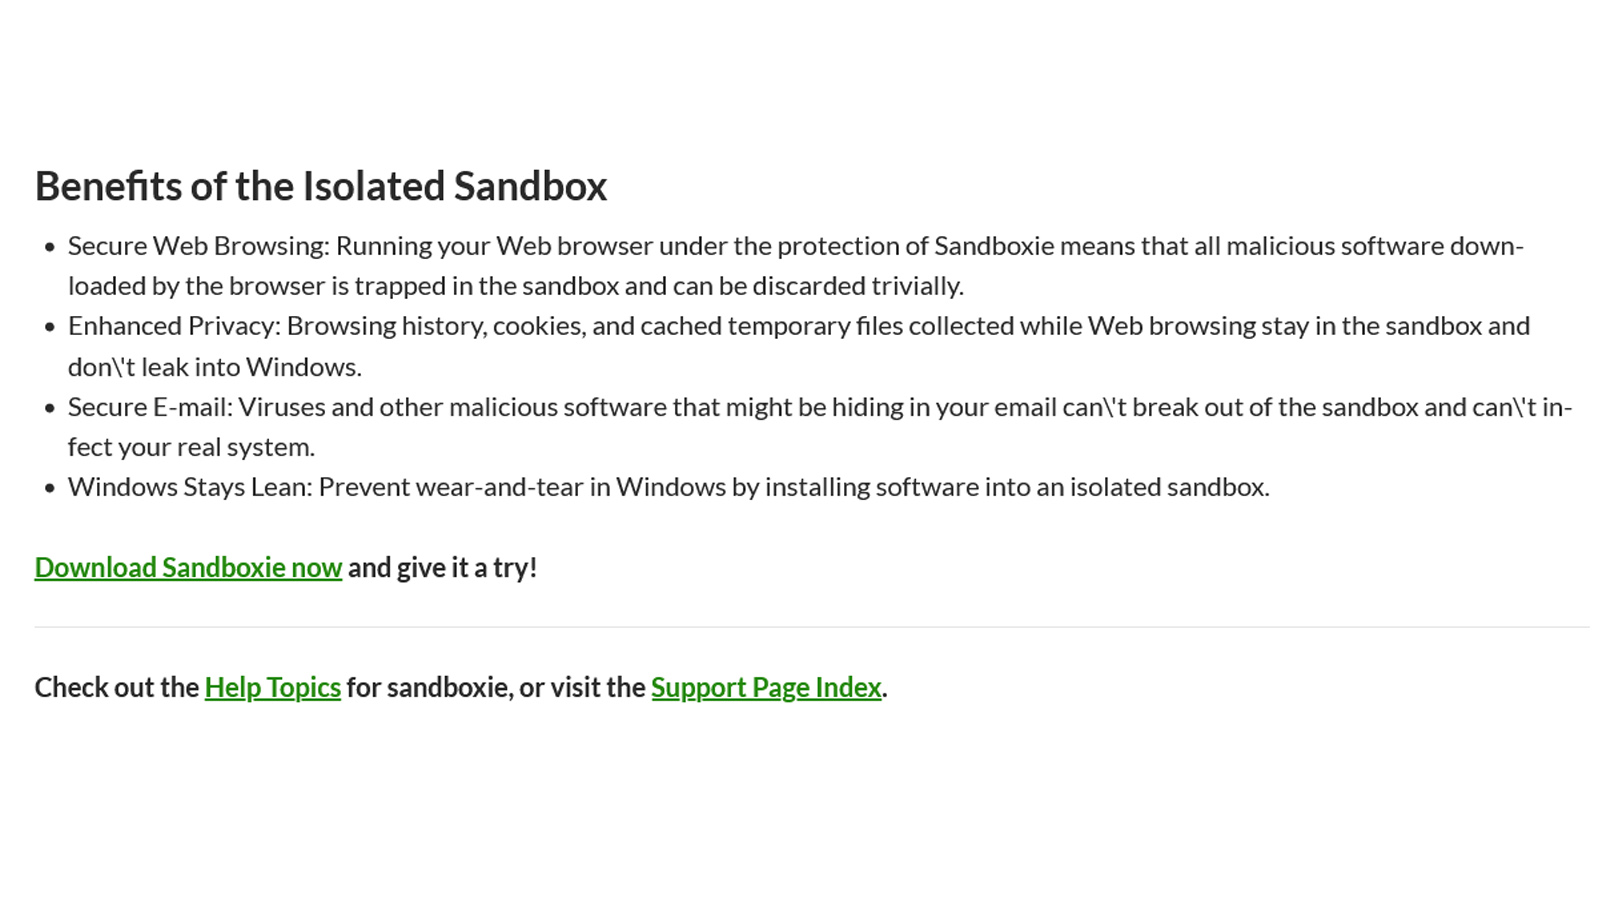 Get feedback from a vast remote working audience about Sandboxie